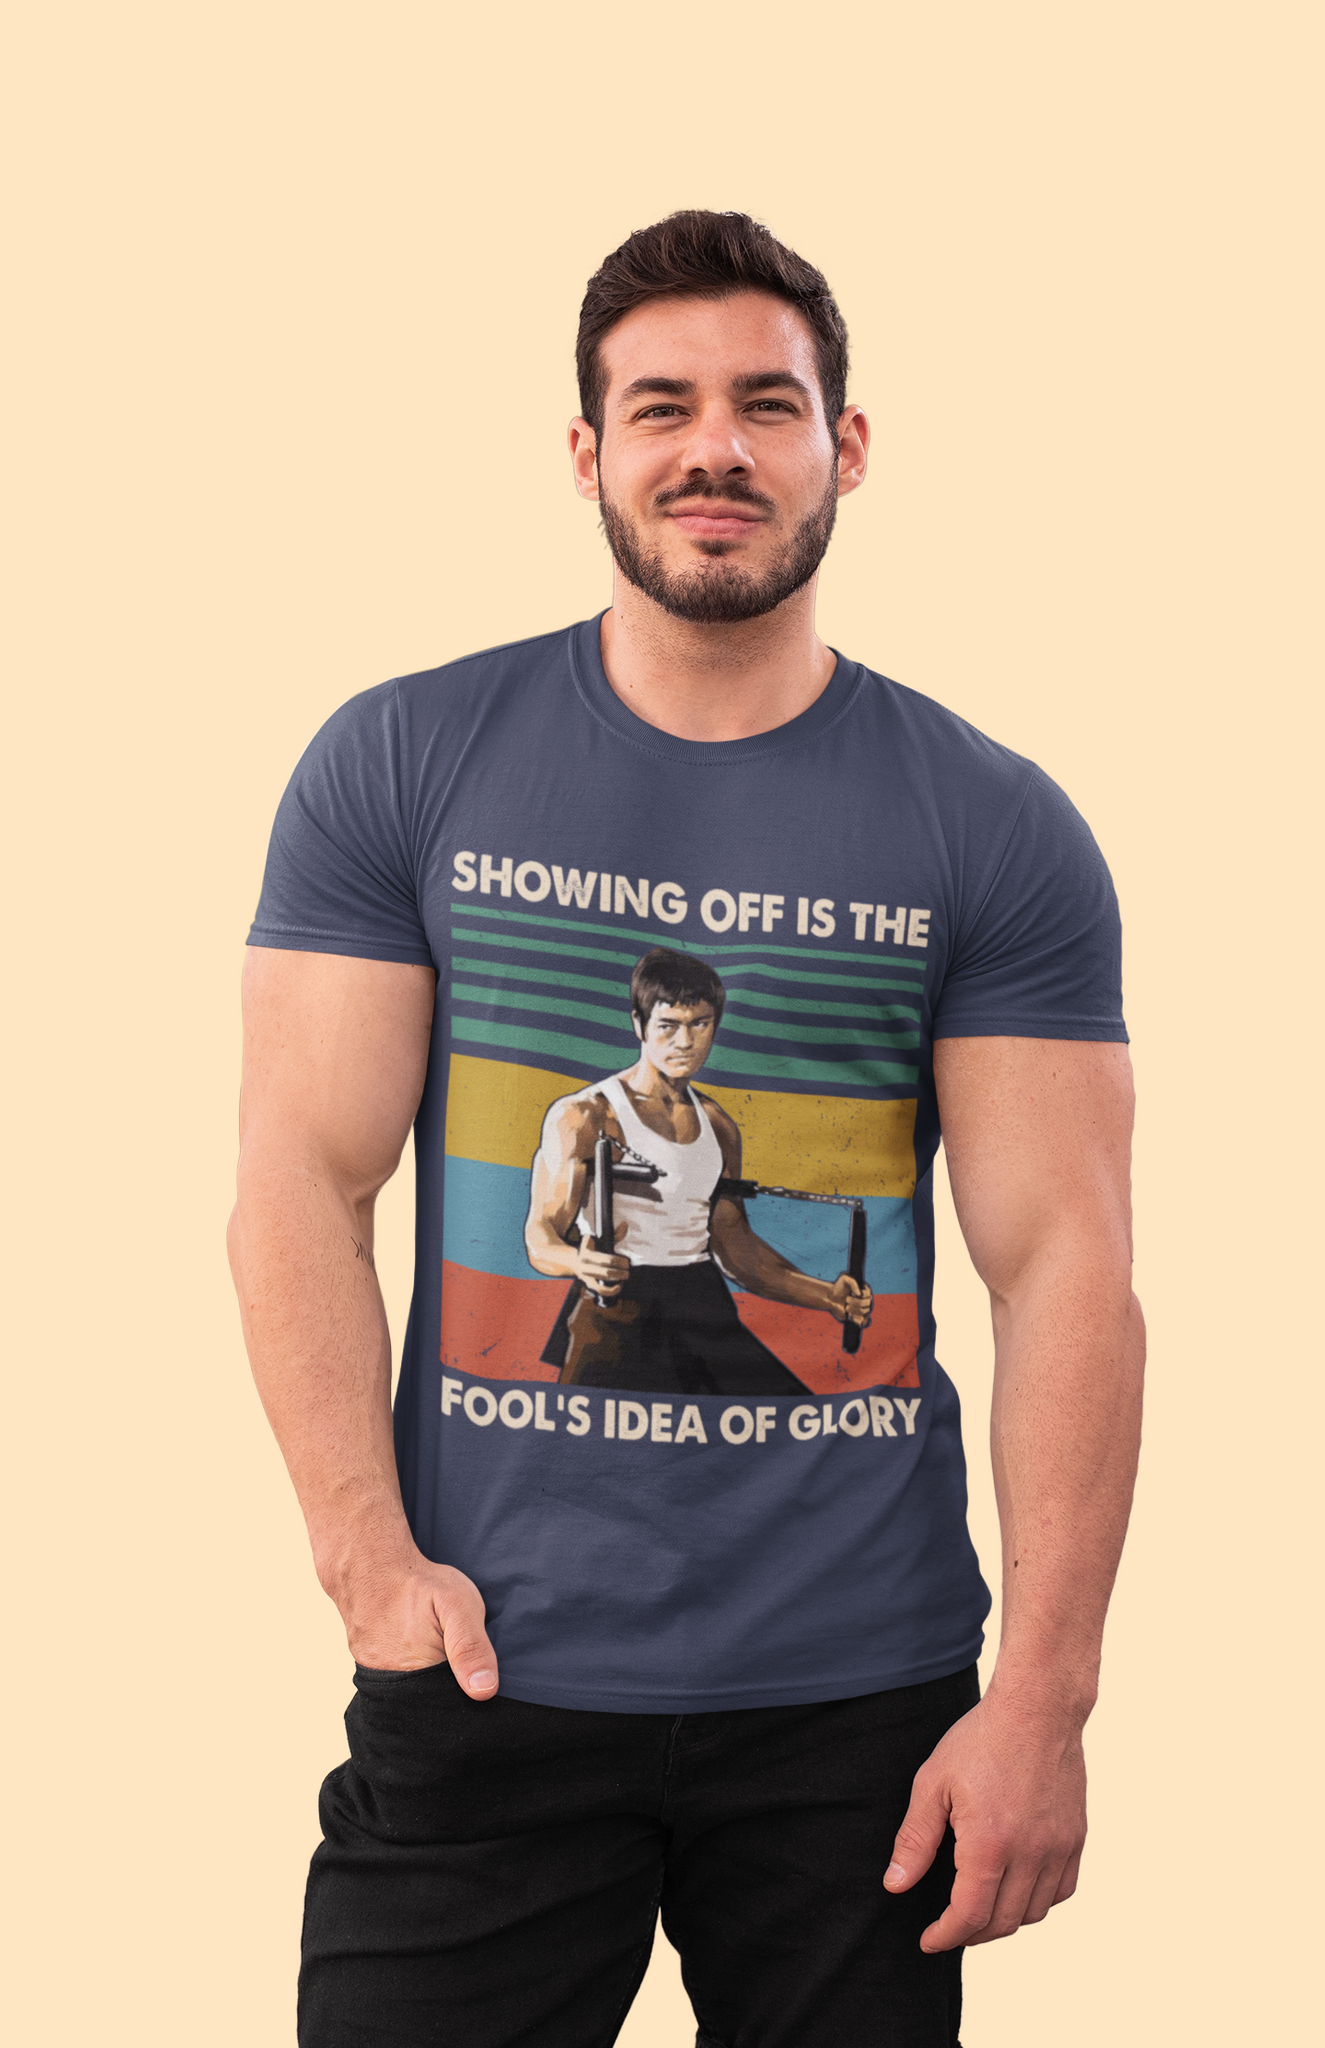 Bruce Lee Vintage Tshirt, Showing Off Is The Fools Idea Of Glory T Shirt